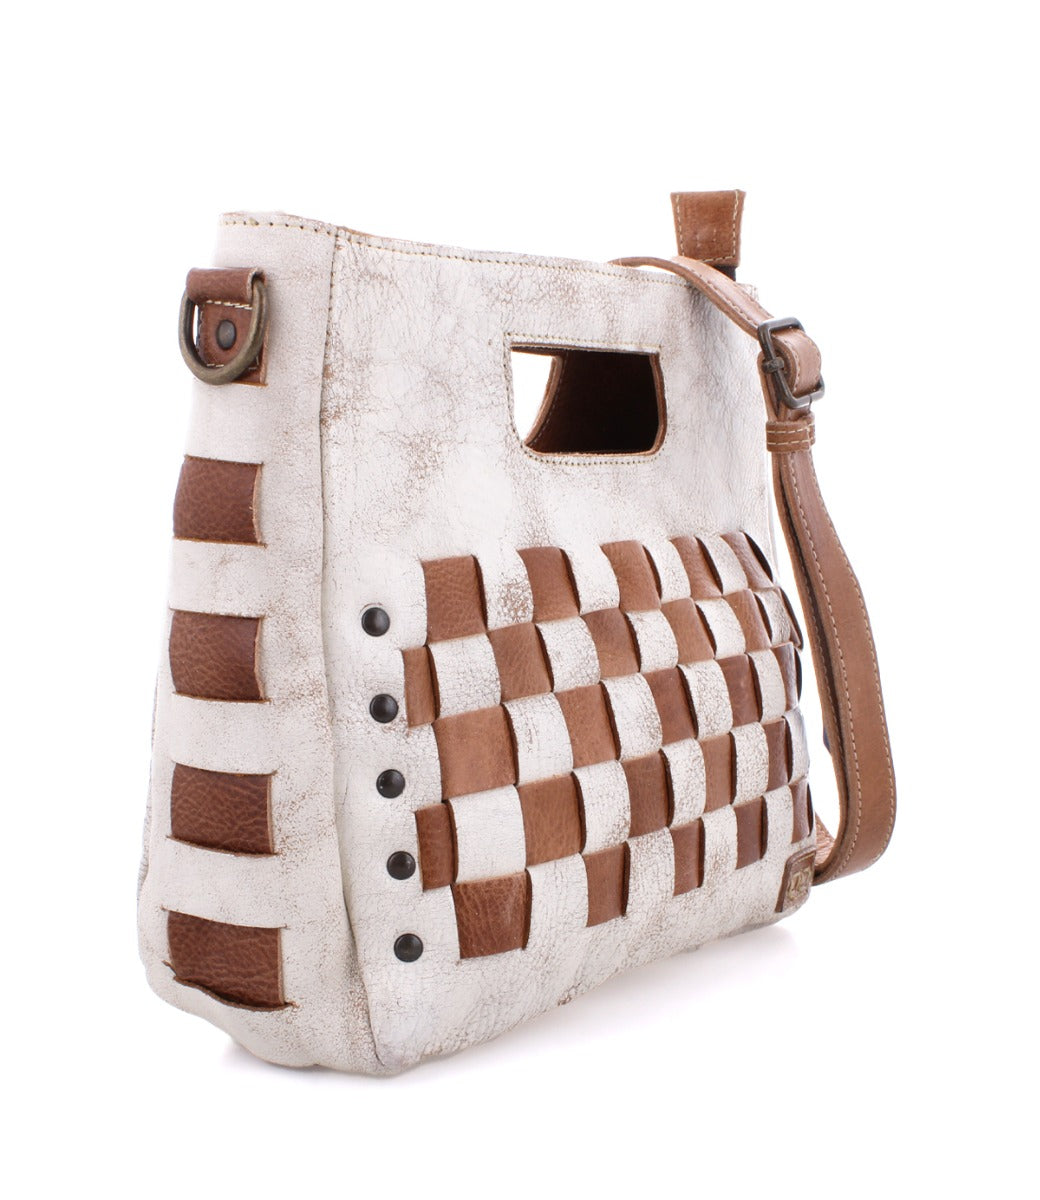 A white and brown Keiki handbag with a woven pattern from Bed Stu.